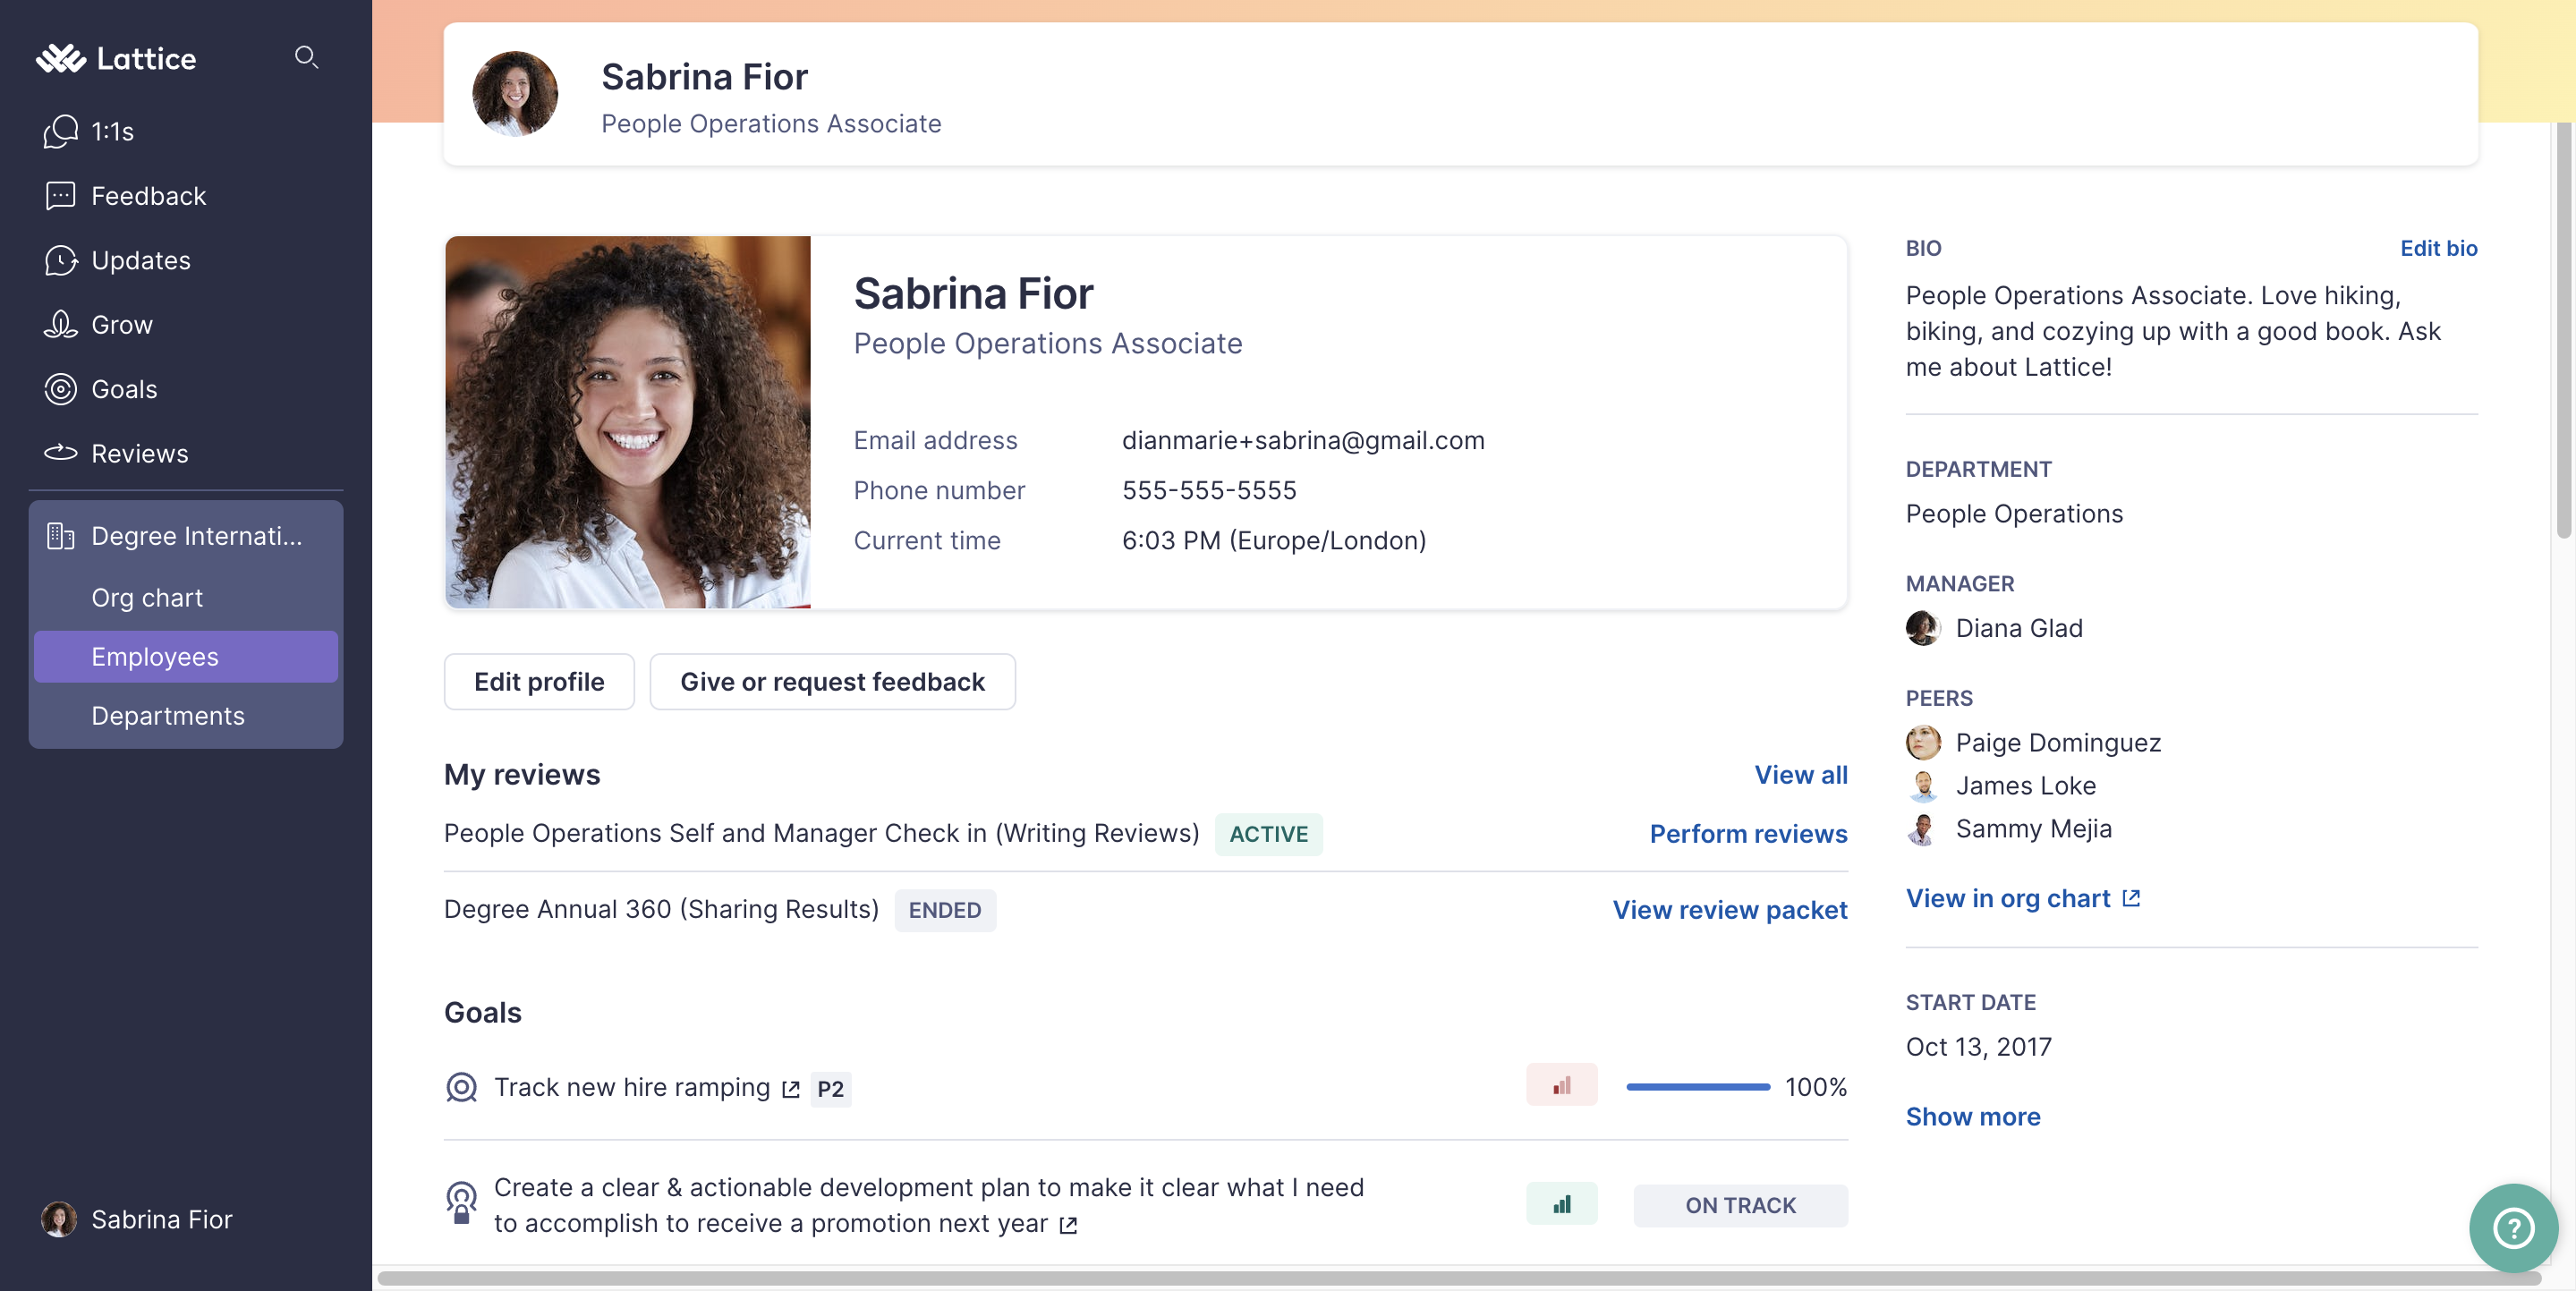 The Employee Profile for Sabrina Fior.